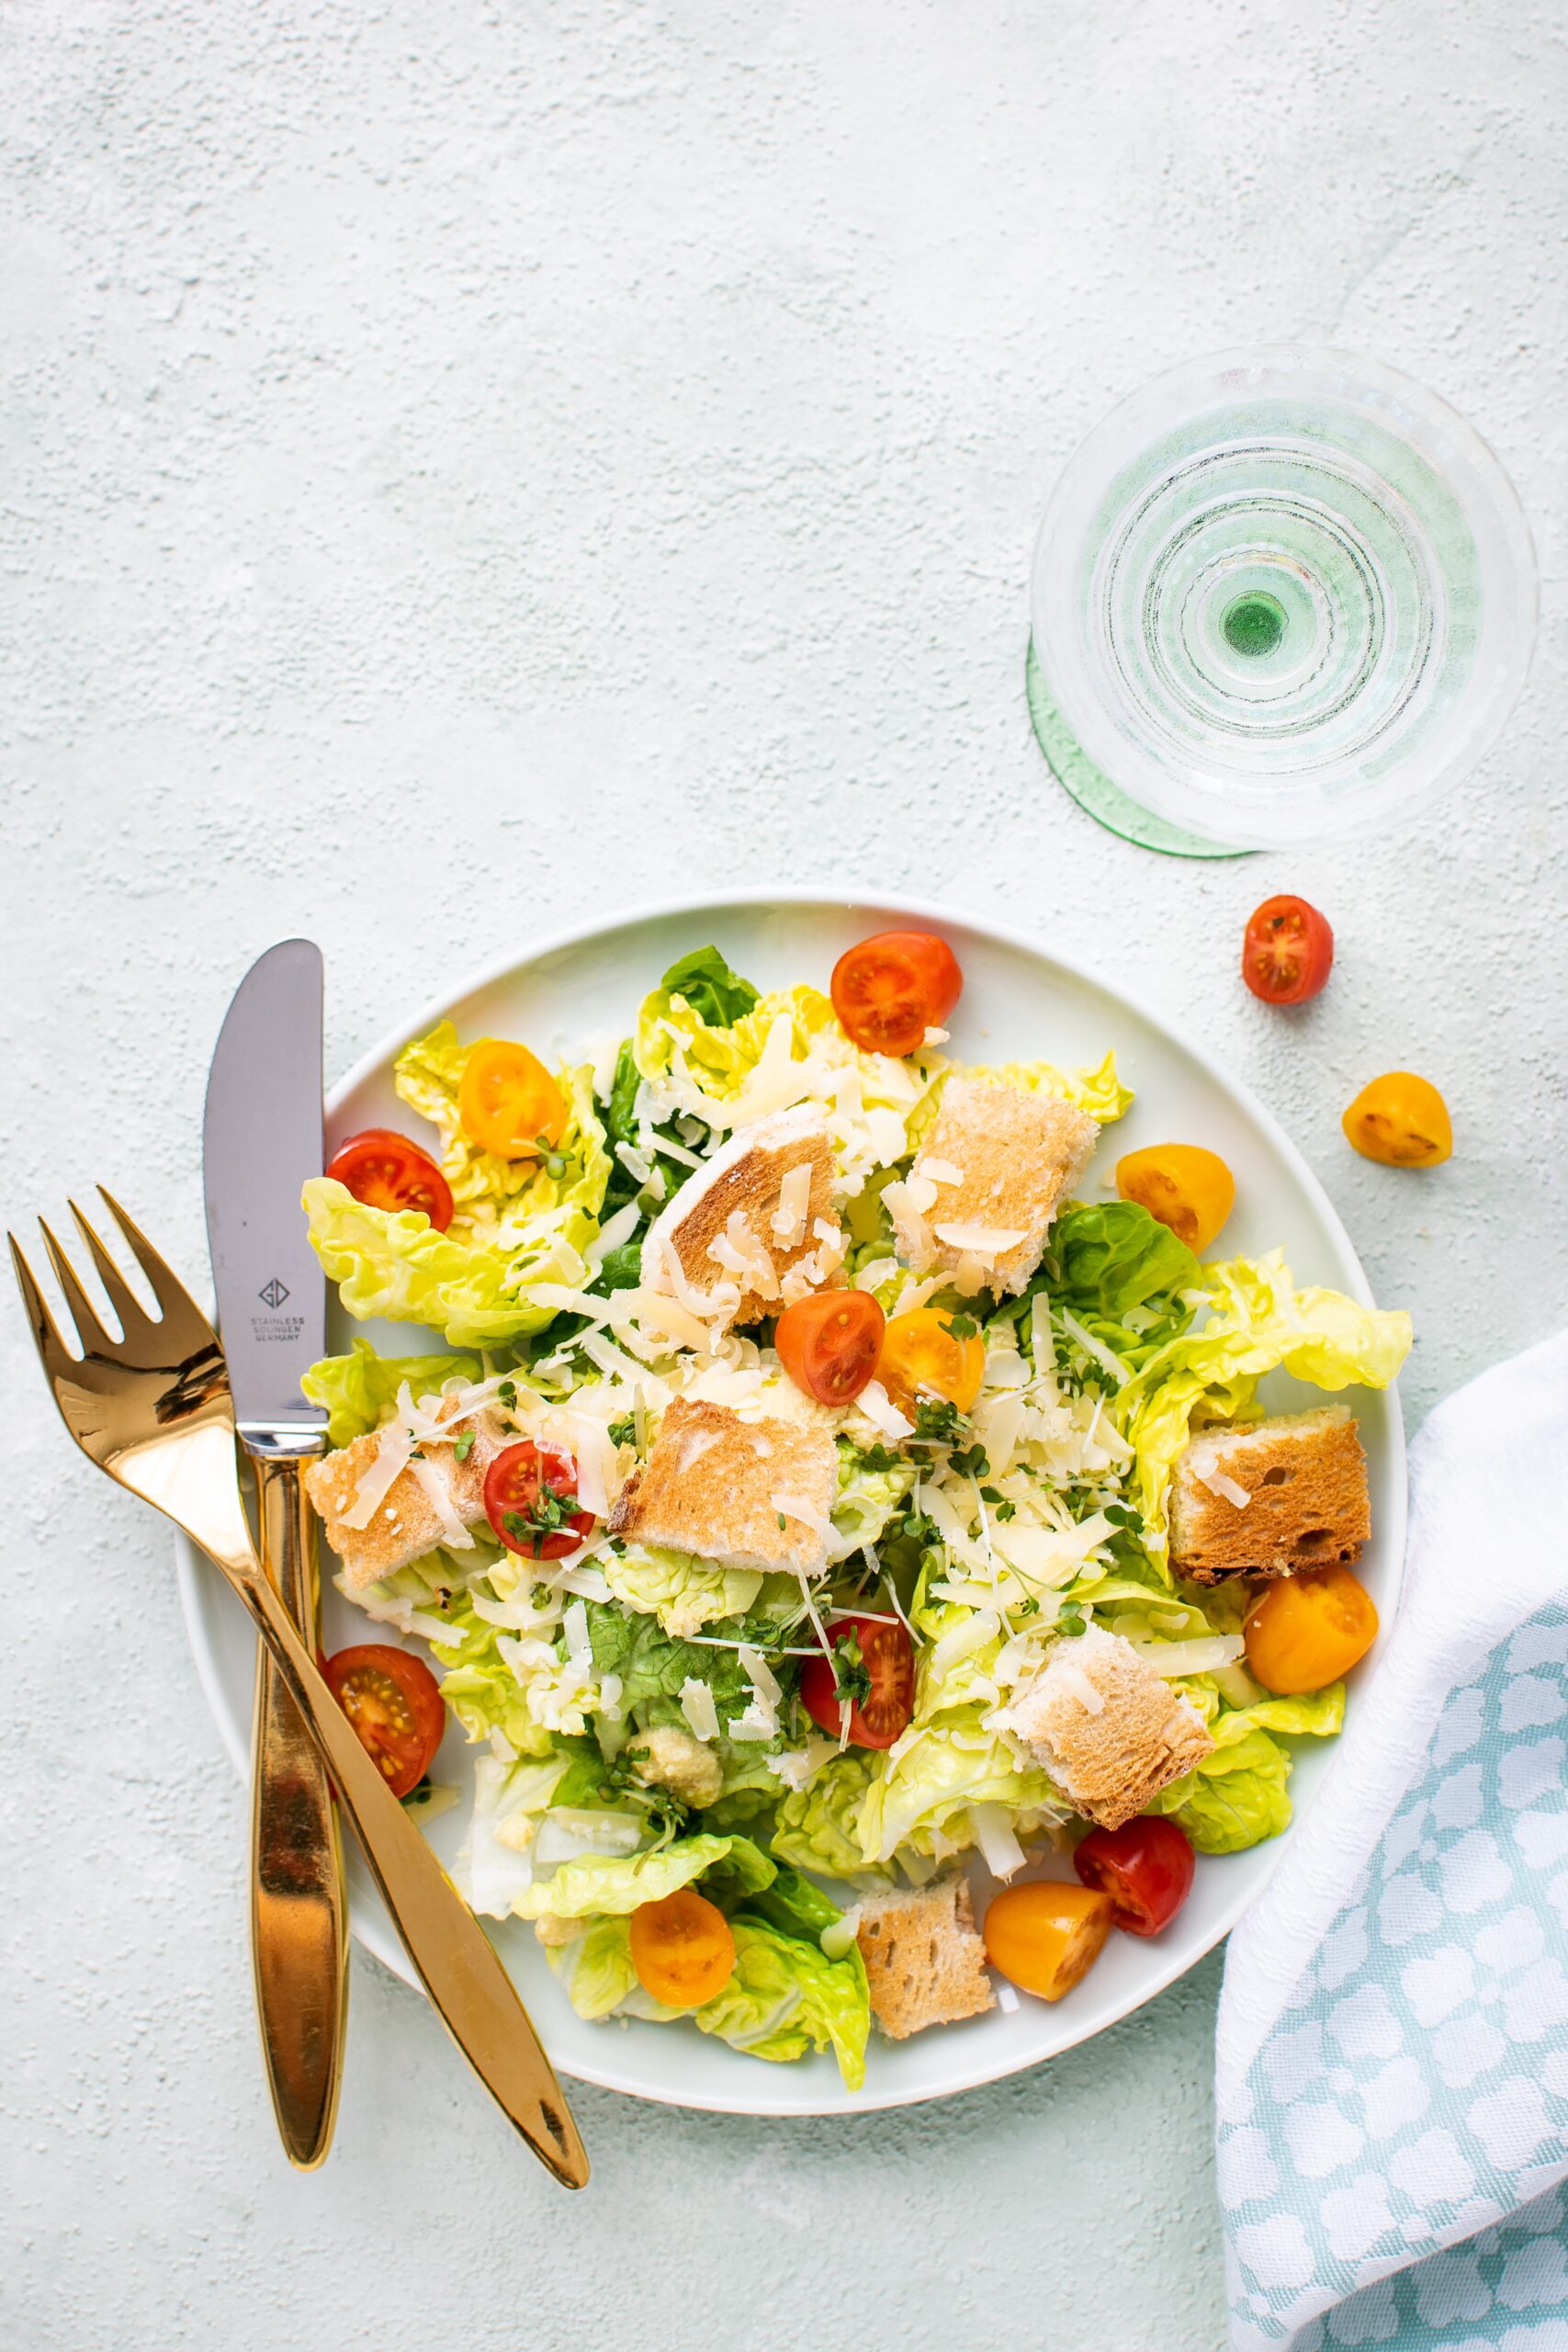 A colorful plate of salad consisting of lettuce, cherry tomatoes, croutons and vegan shredded cheese, served with a fork and knife.